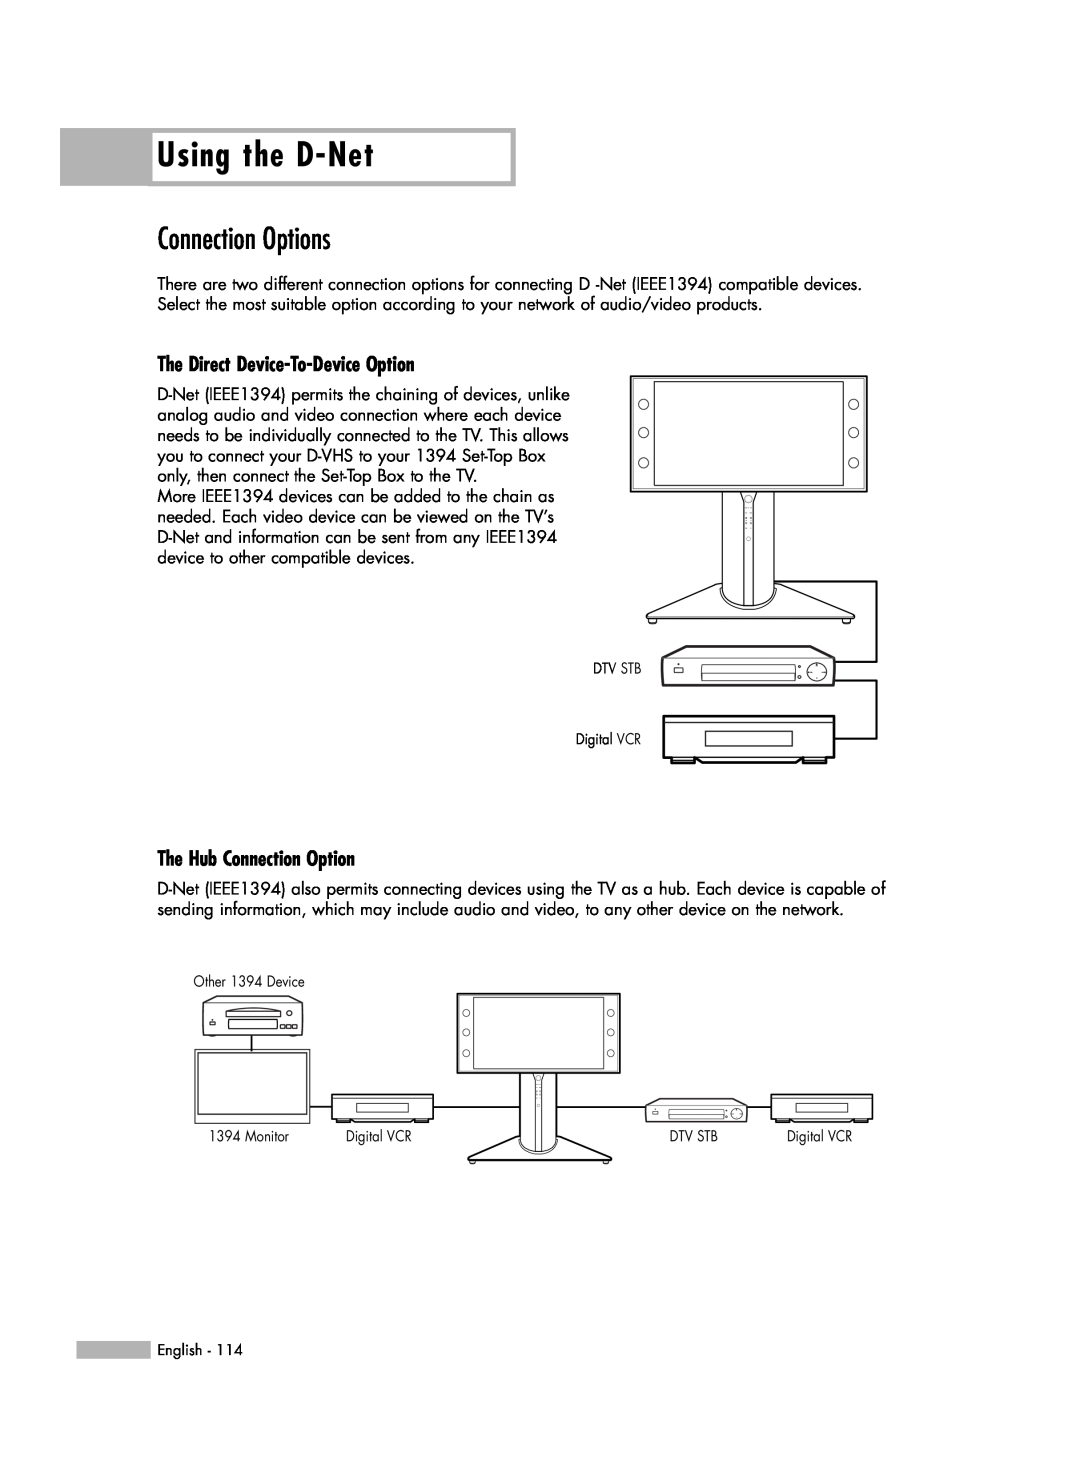 Samsung HL-R5688W manual Connection Options, The Direct Device-To-Device Option, The Hub Connection Option, Using the D-Net 